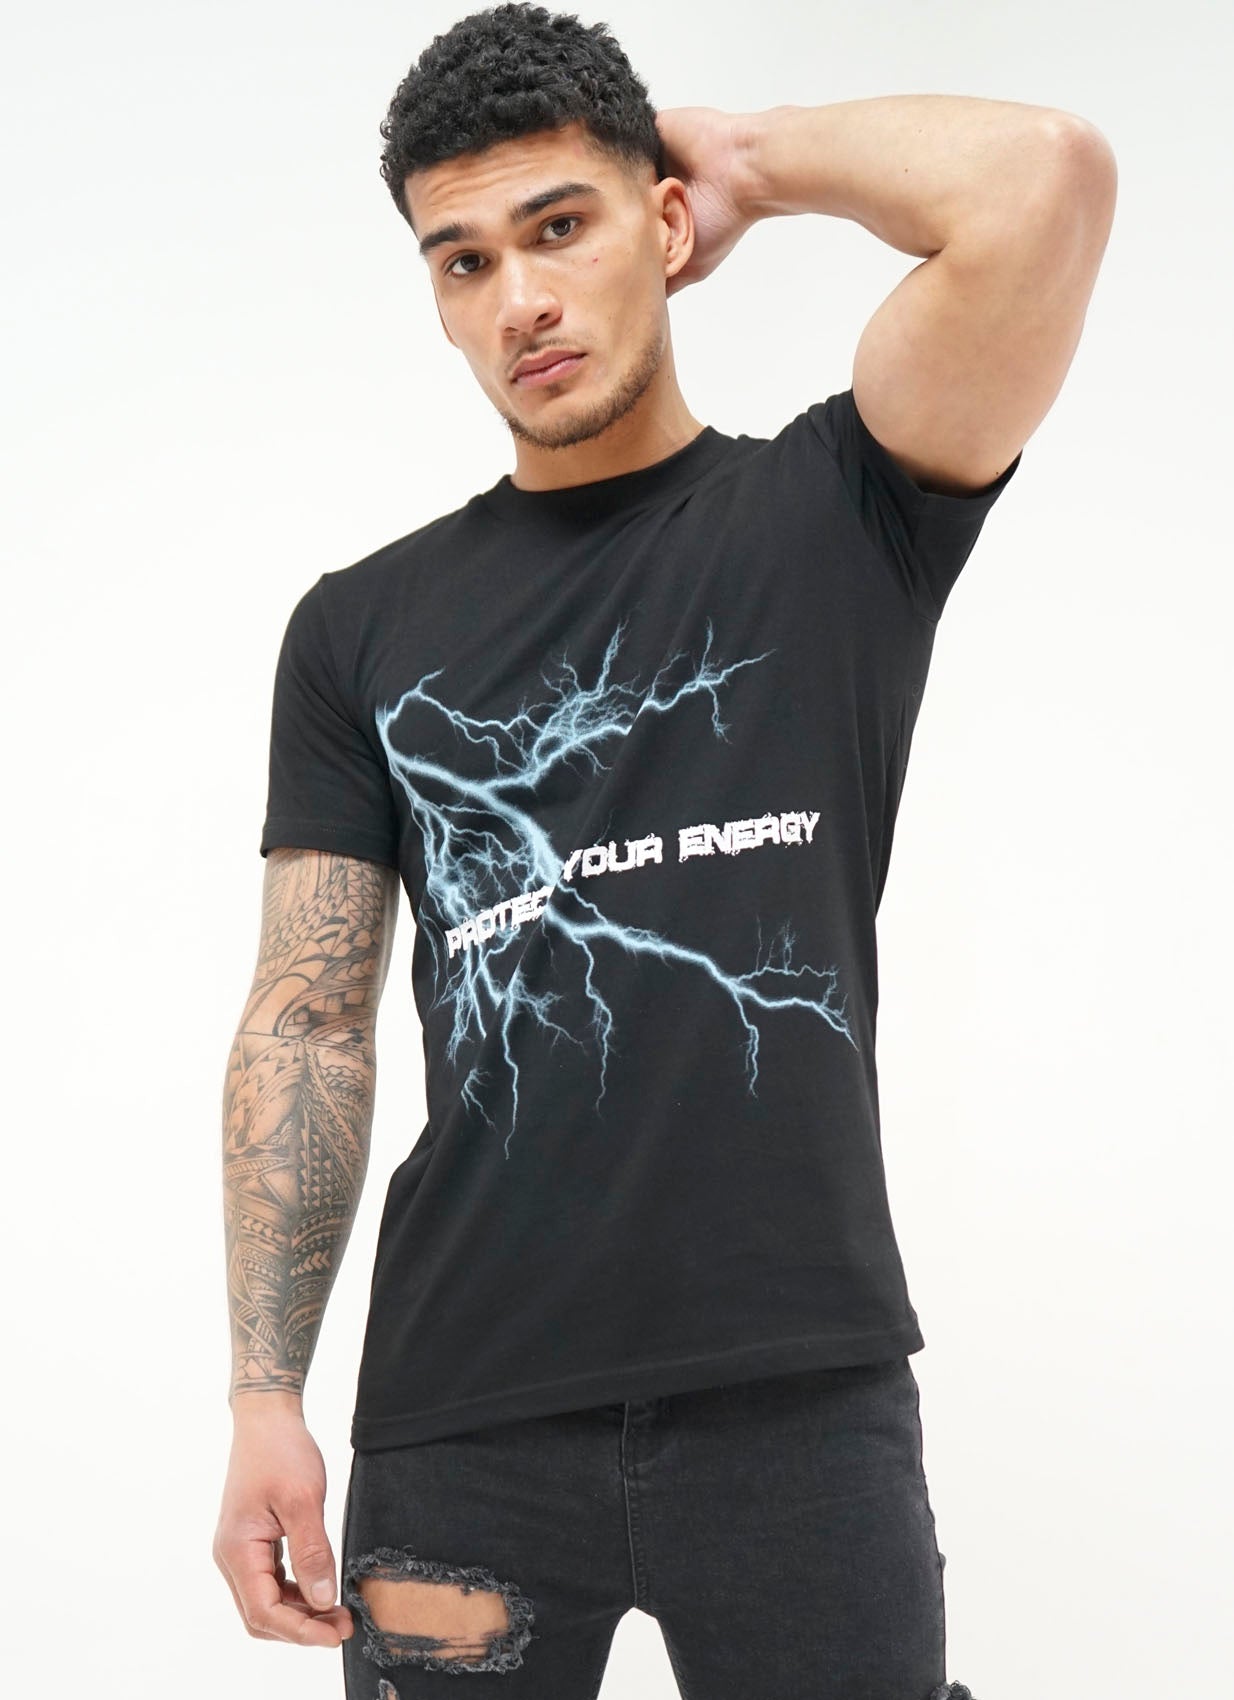 BLACK PROTECT YOUR ENERGY T-SHIRT